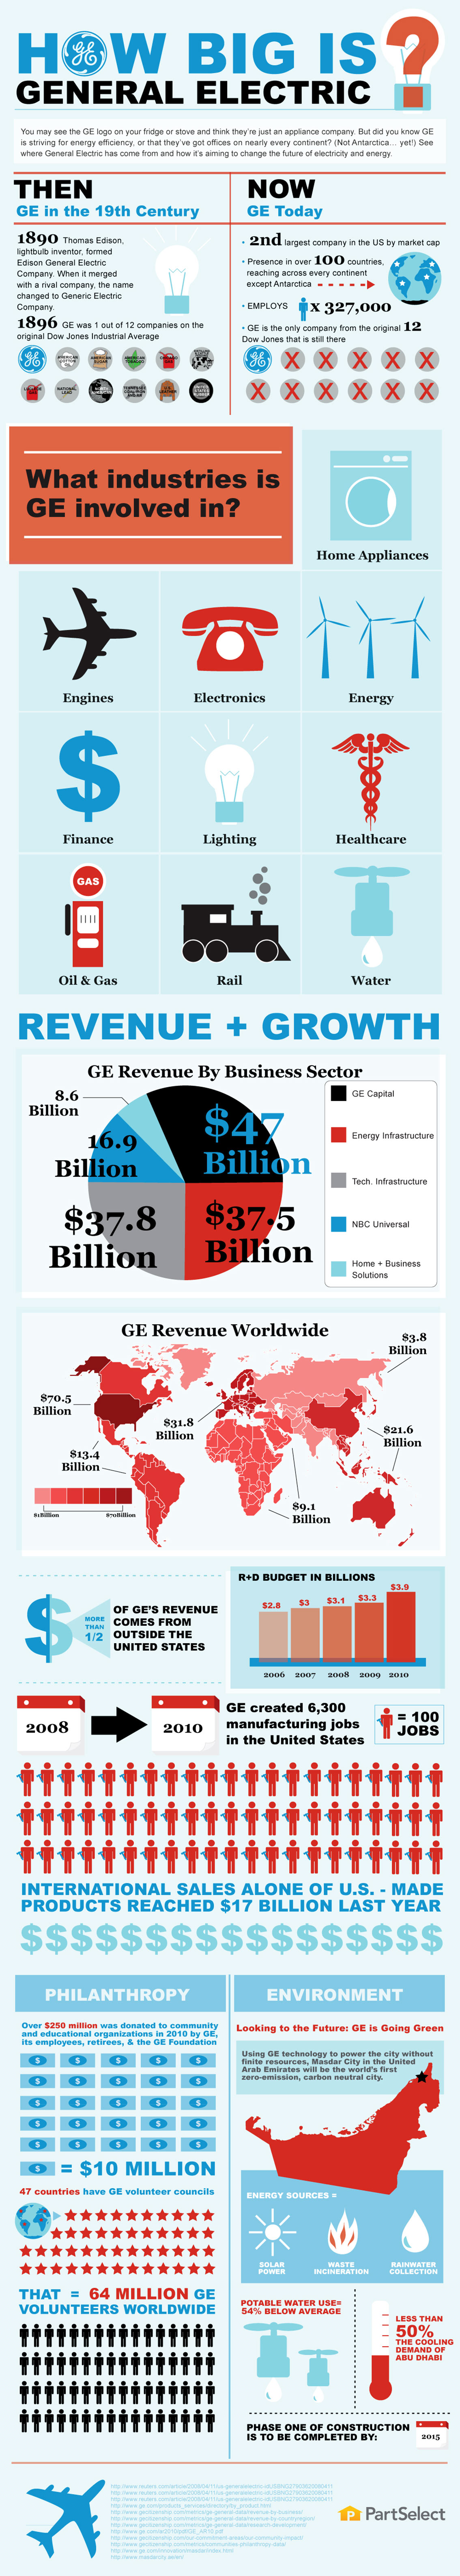 How Big is General Electric Infographic